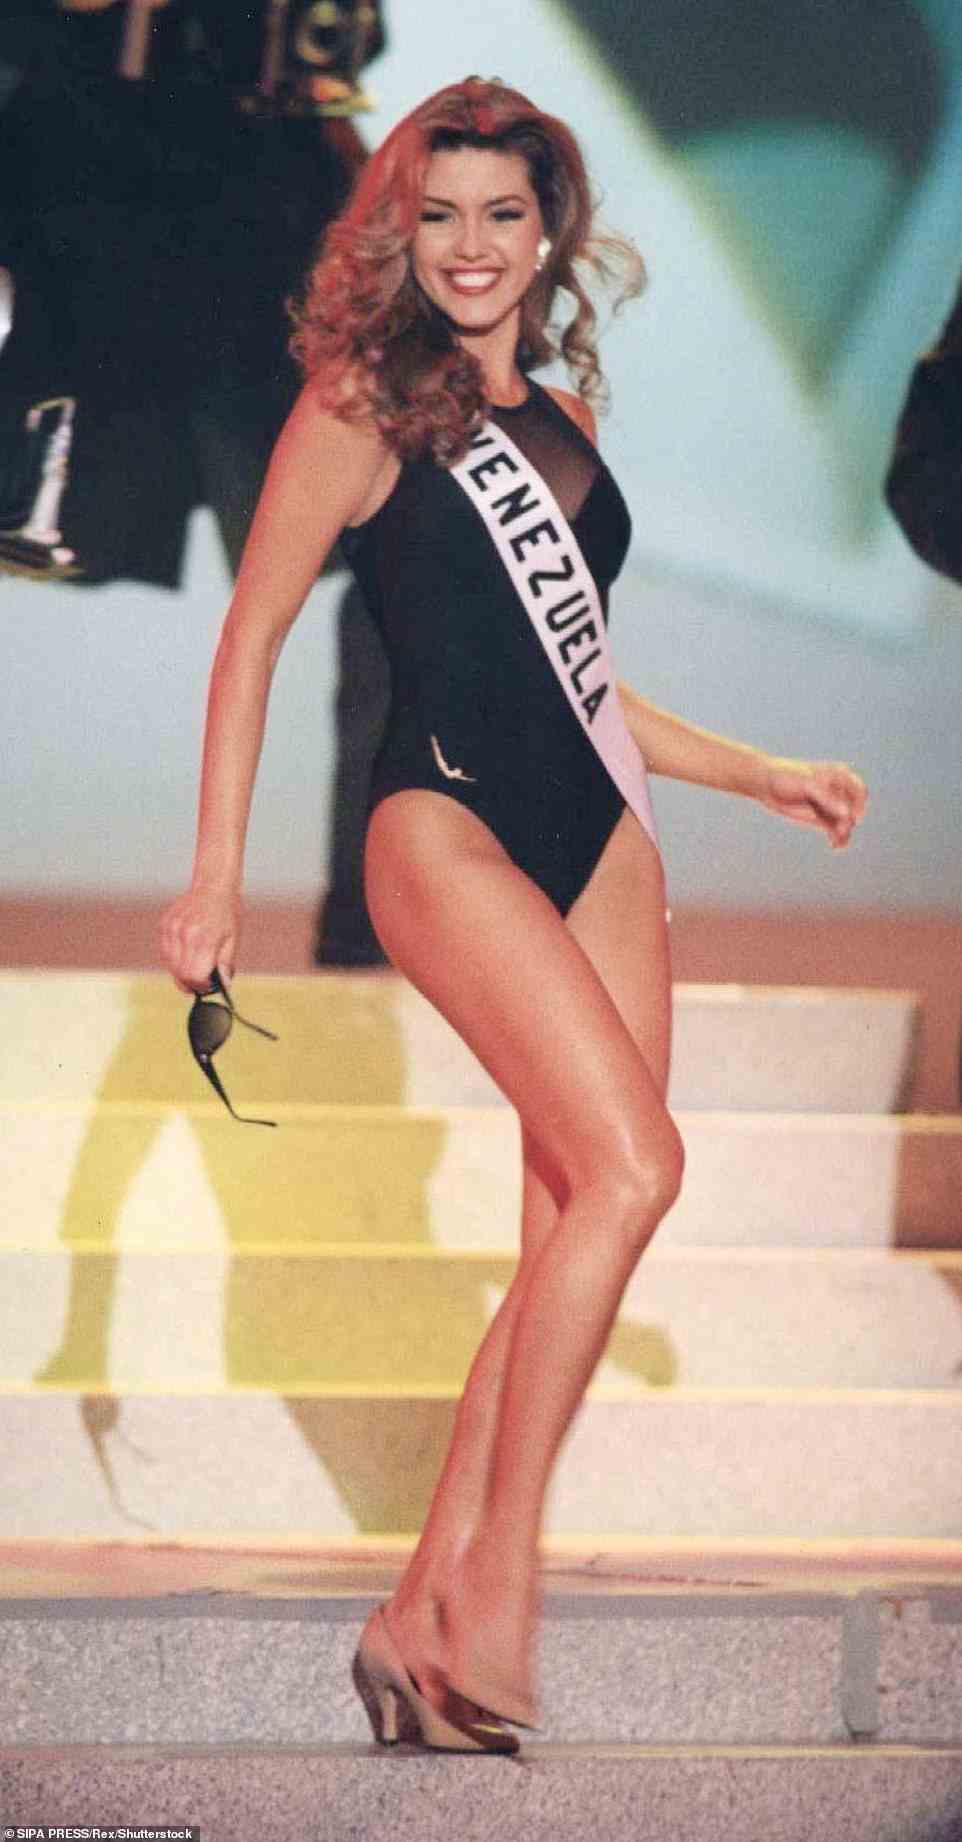 Miss Universe 1996, Alicia Machado, now 45, from Venezuela, was reportedly told by officials that she was going to be replaced if she didn't lose weight. She is seen in 1996